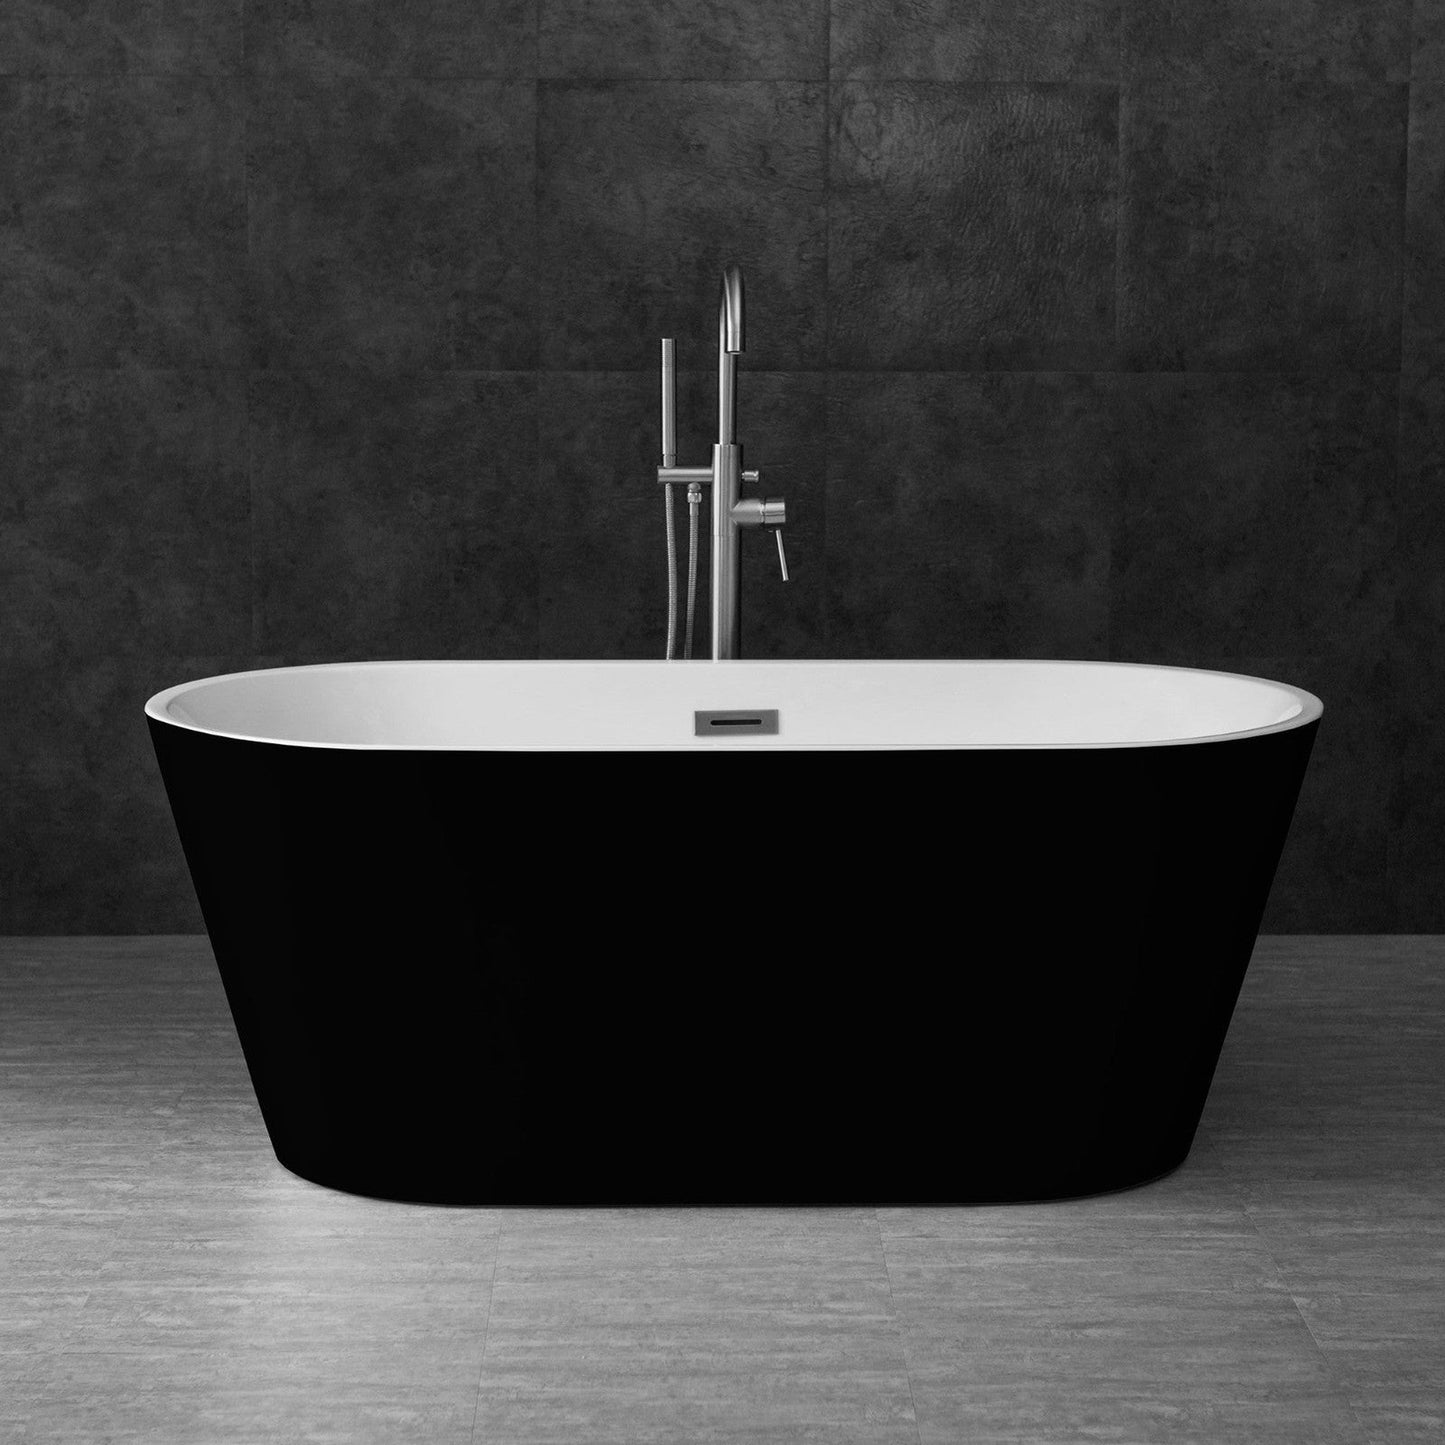 WoodBridge 59" Black Acrylic Freestanding Contemporary Soaking Bathtub With Brushed Nickel Drain, Overflow, F0001BNSQ Tub Filler and Caddy Tray